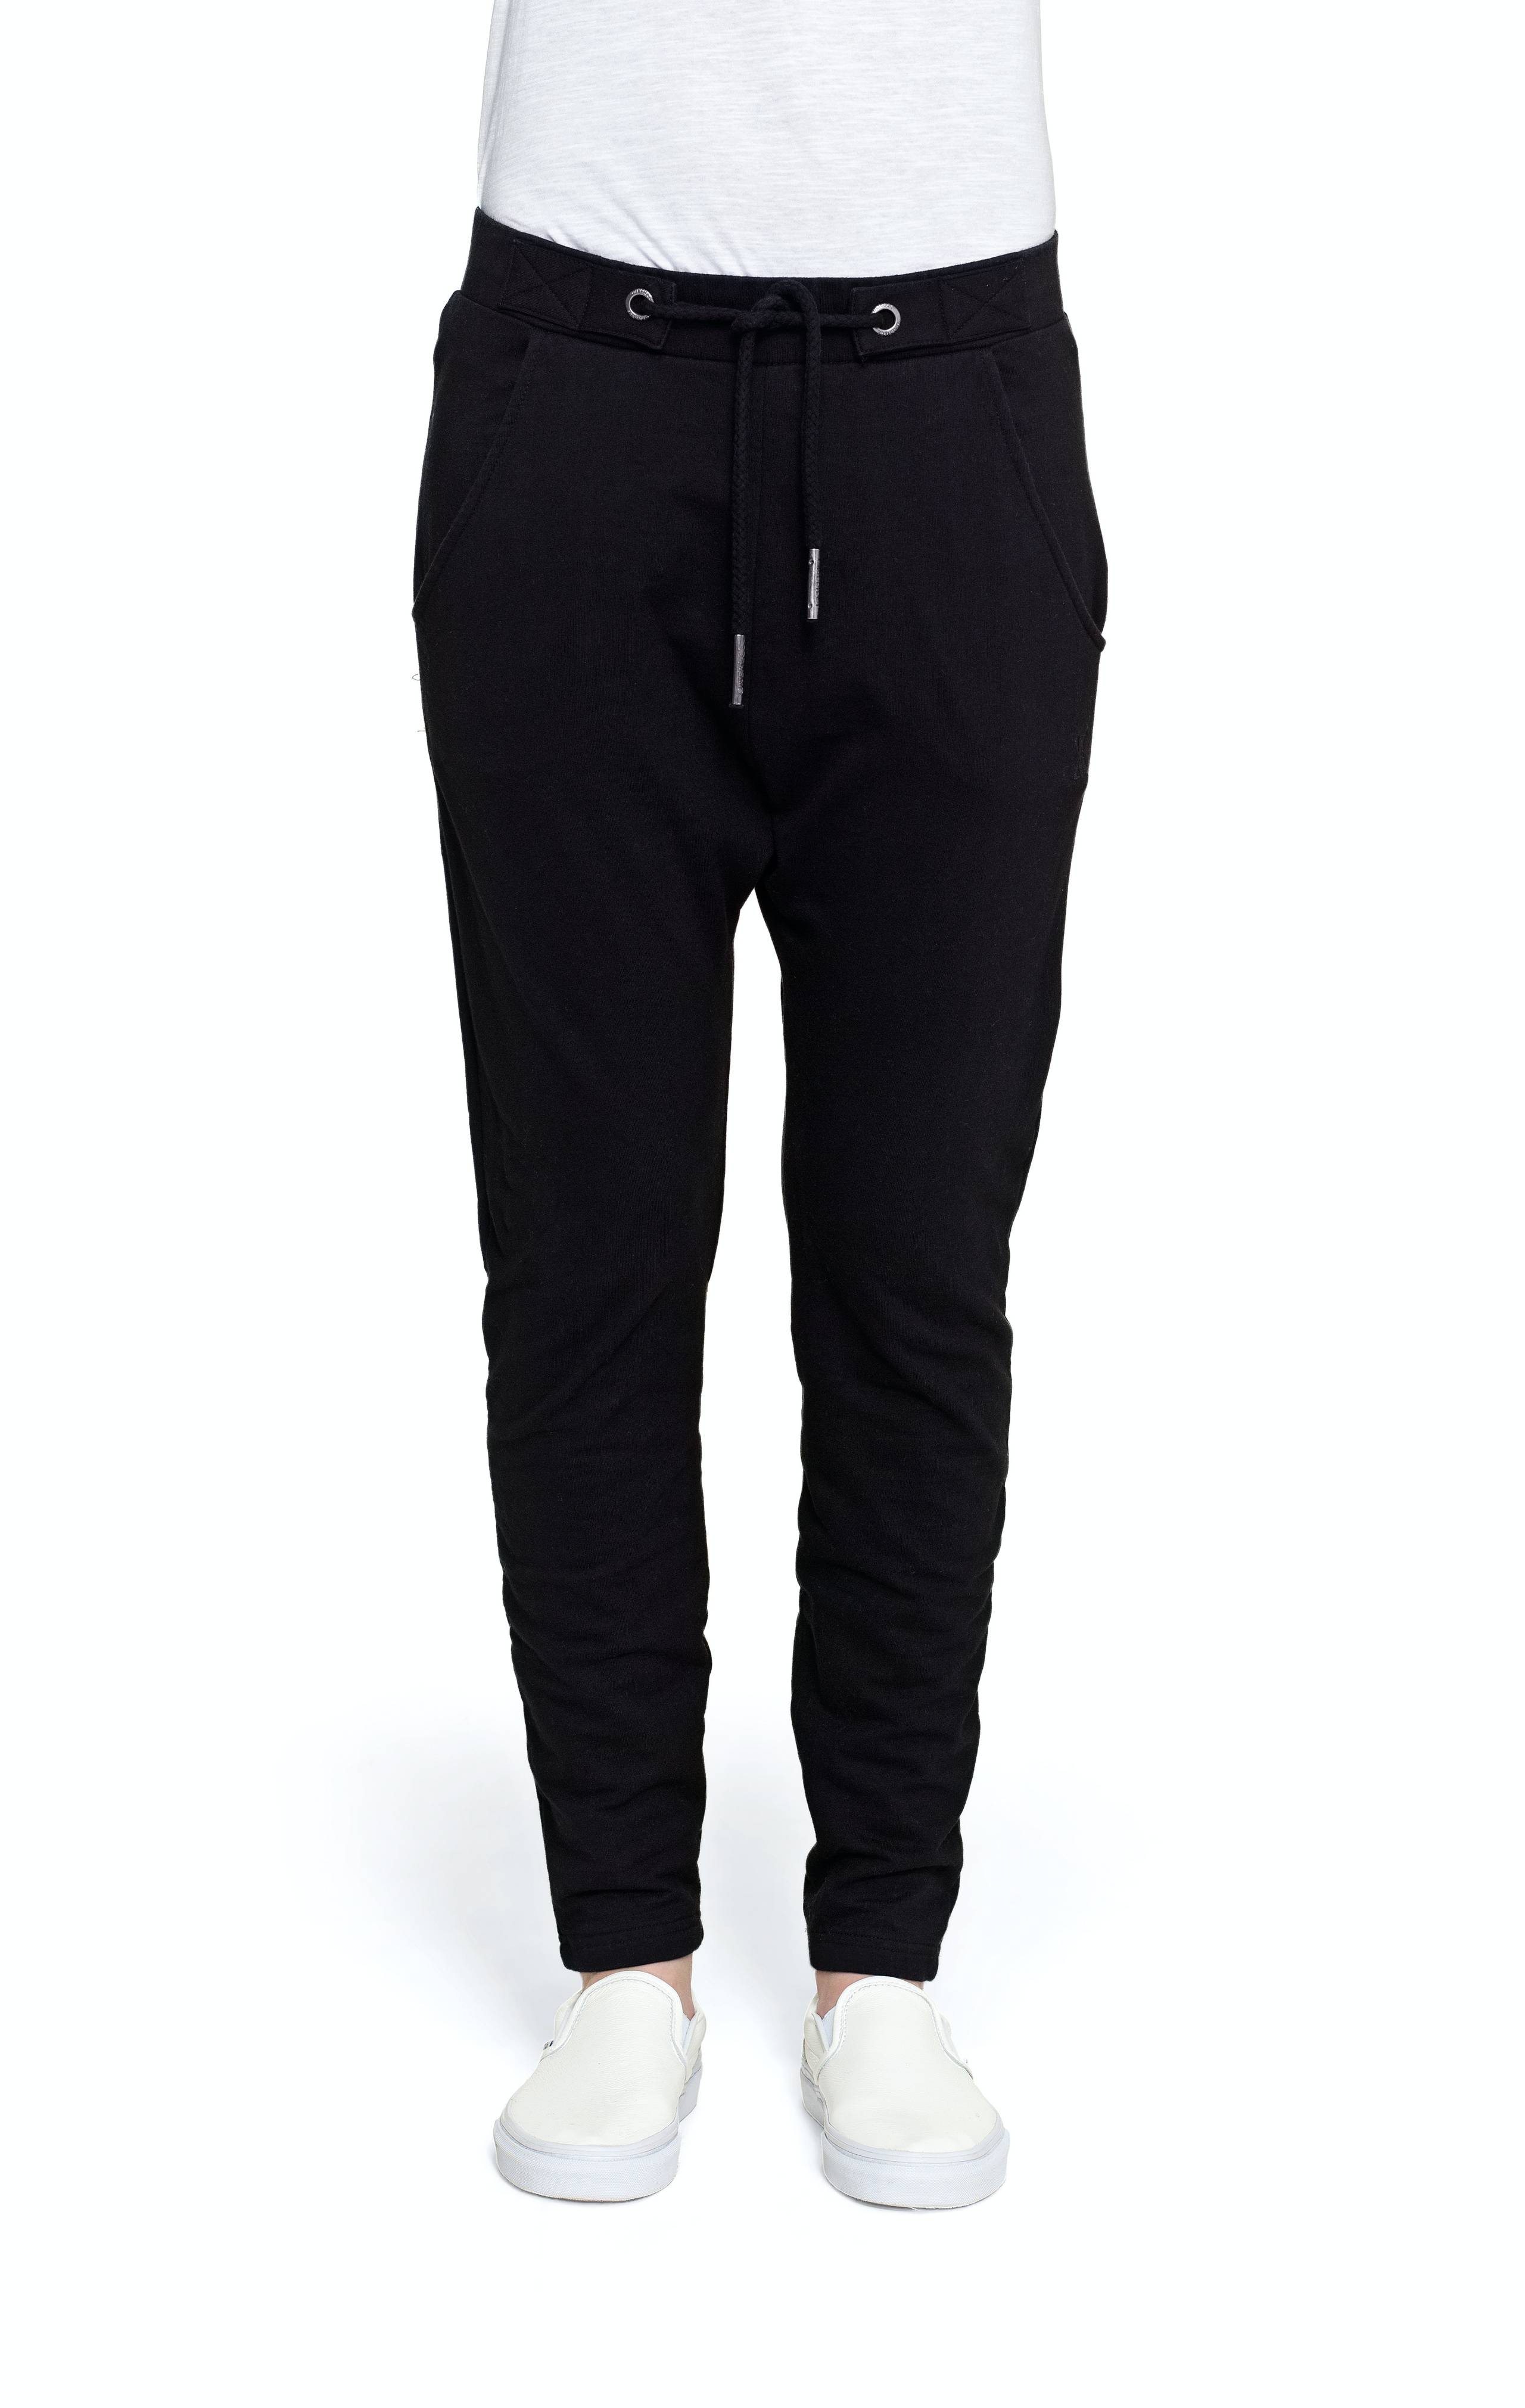 Onepiece Whatever Pants Black - 2